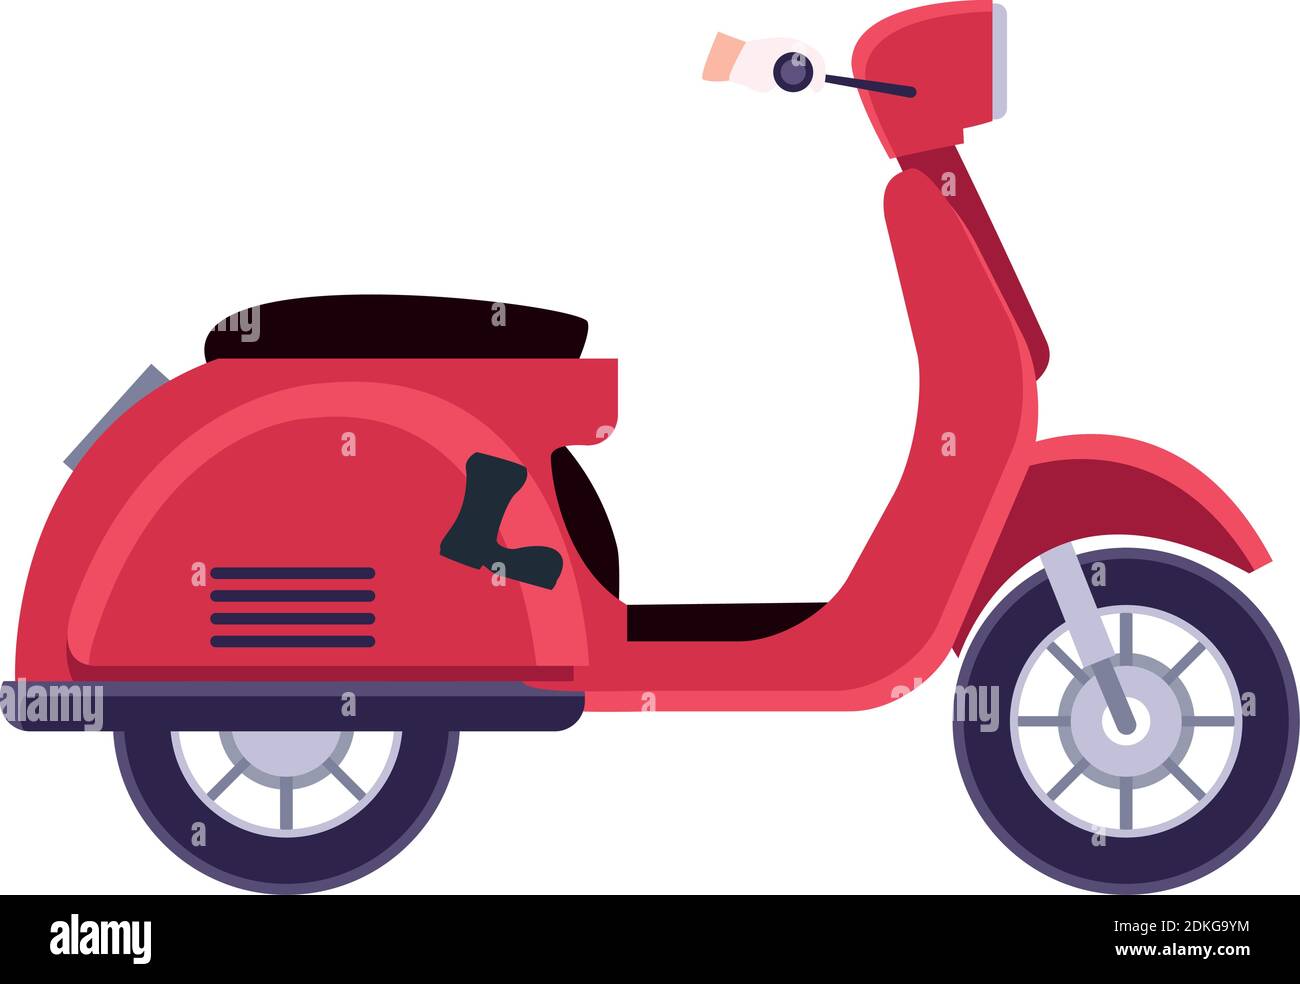 scooter motorcycle vehicle isolated icon vector illustration design Stock Vector